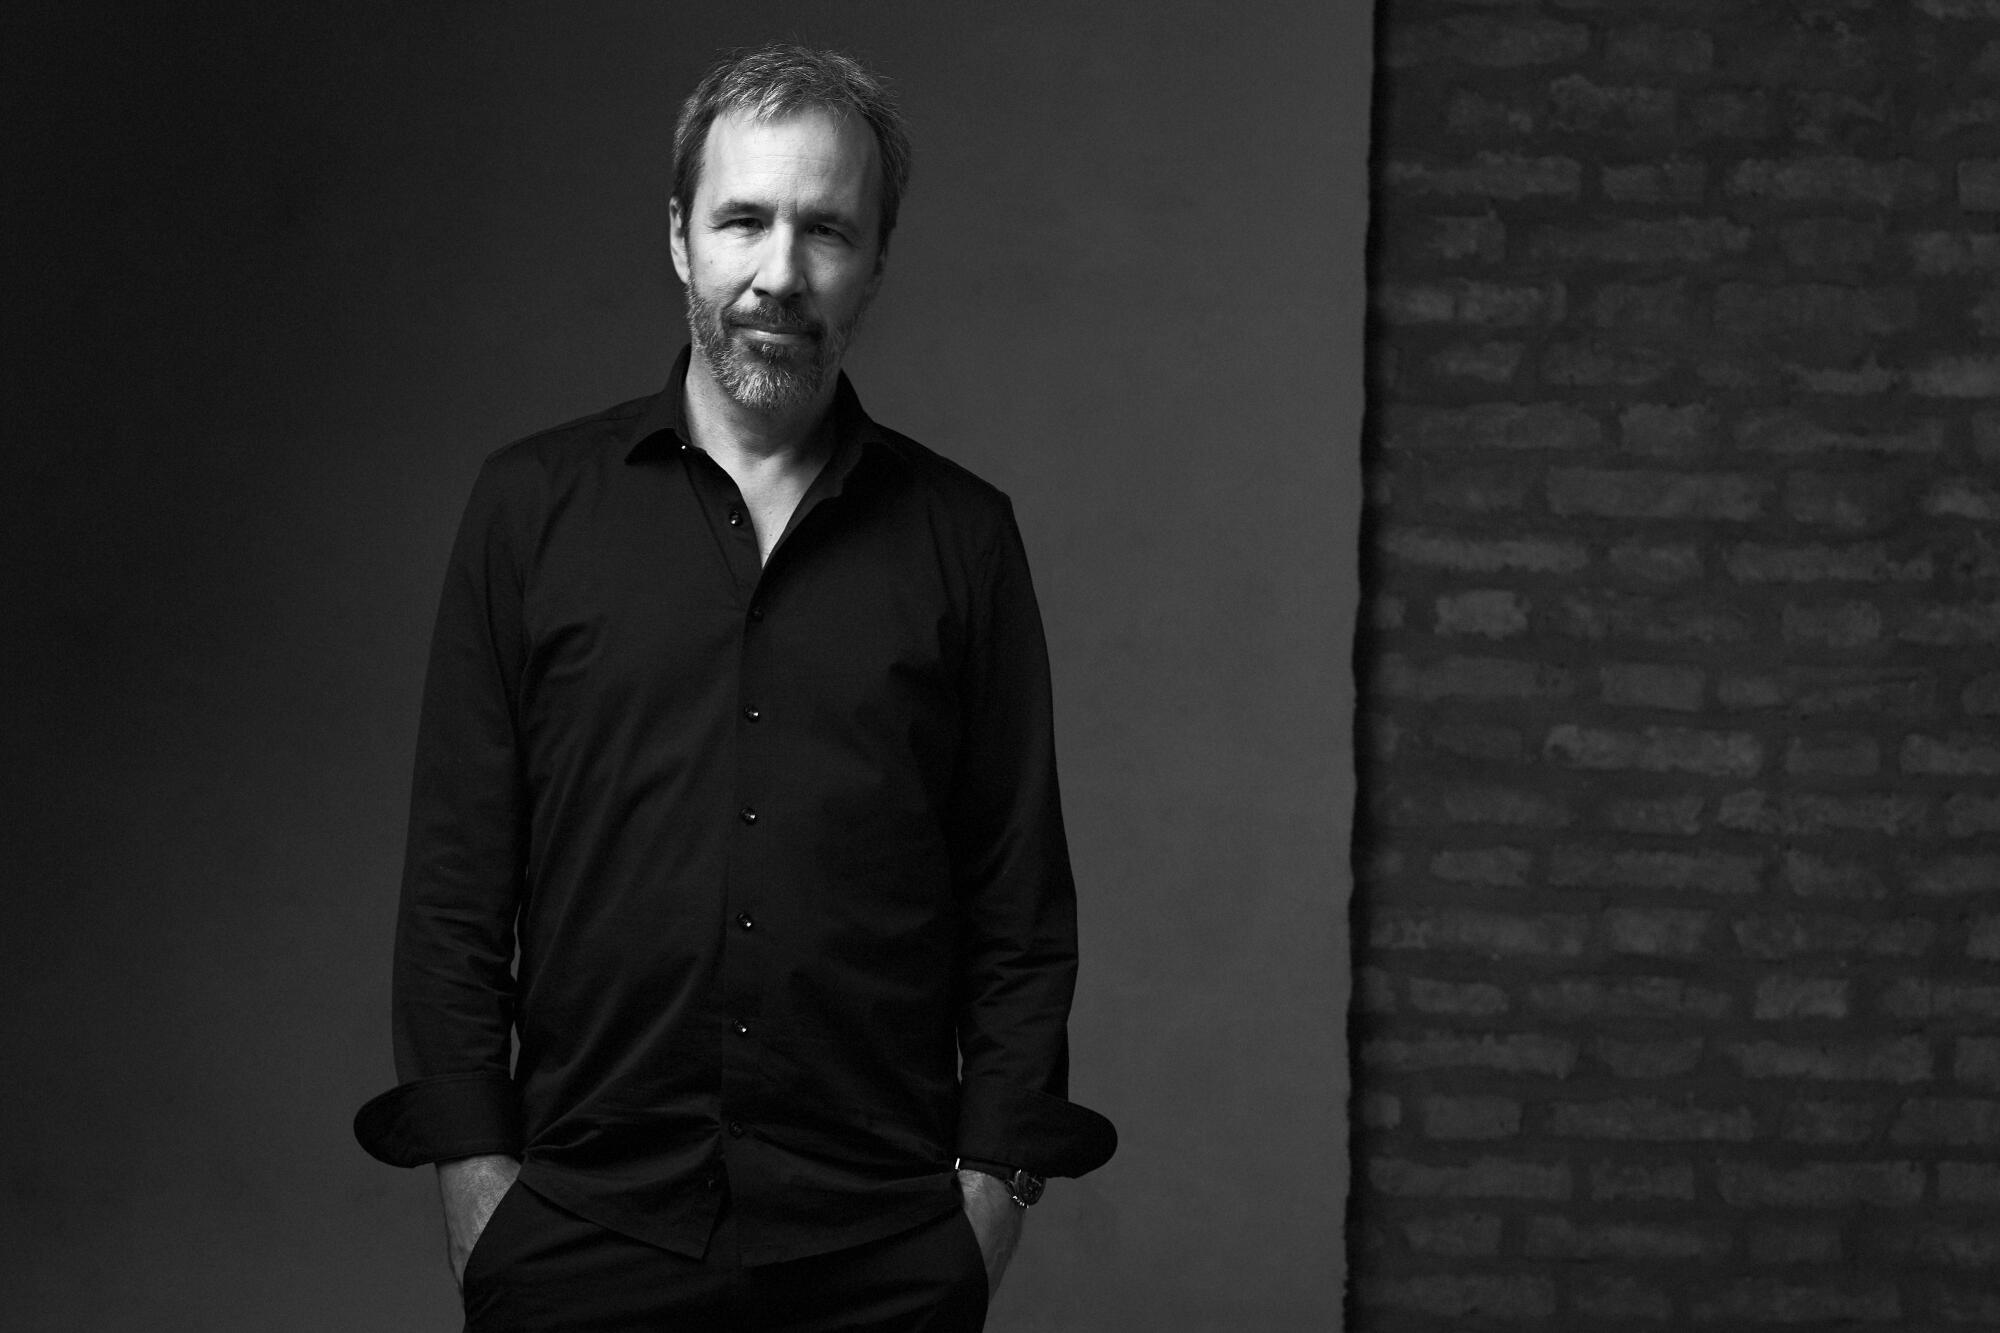 A portrait of filmmaker Denis Villeneuve, all in black, standing with his hands in his pockets.